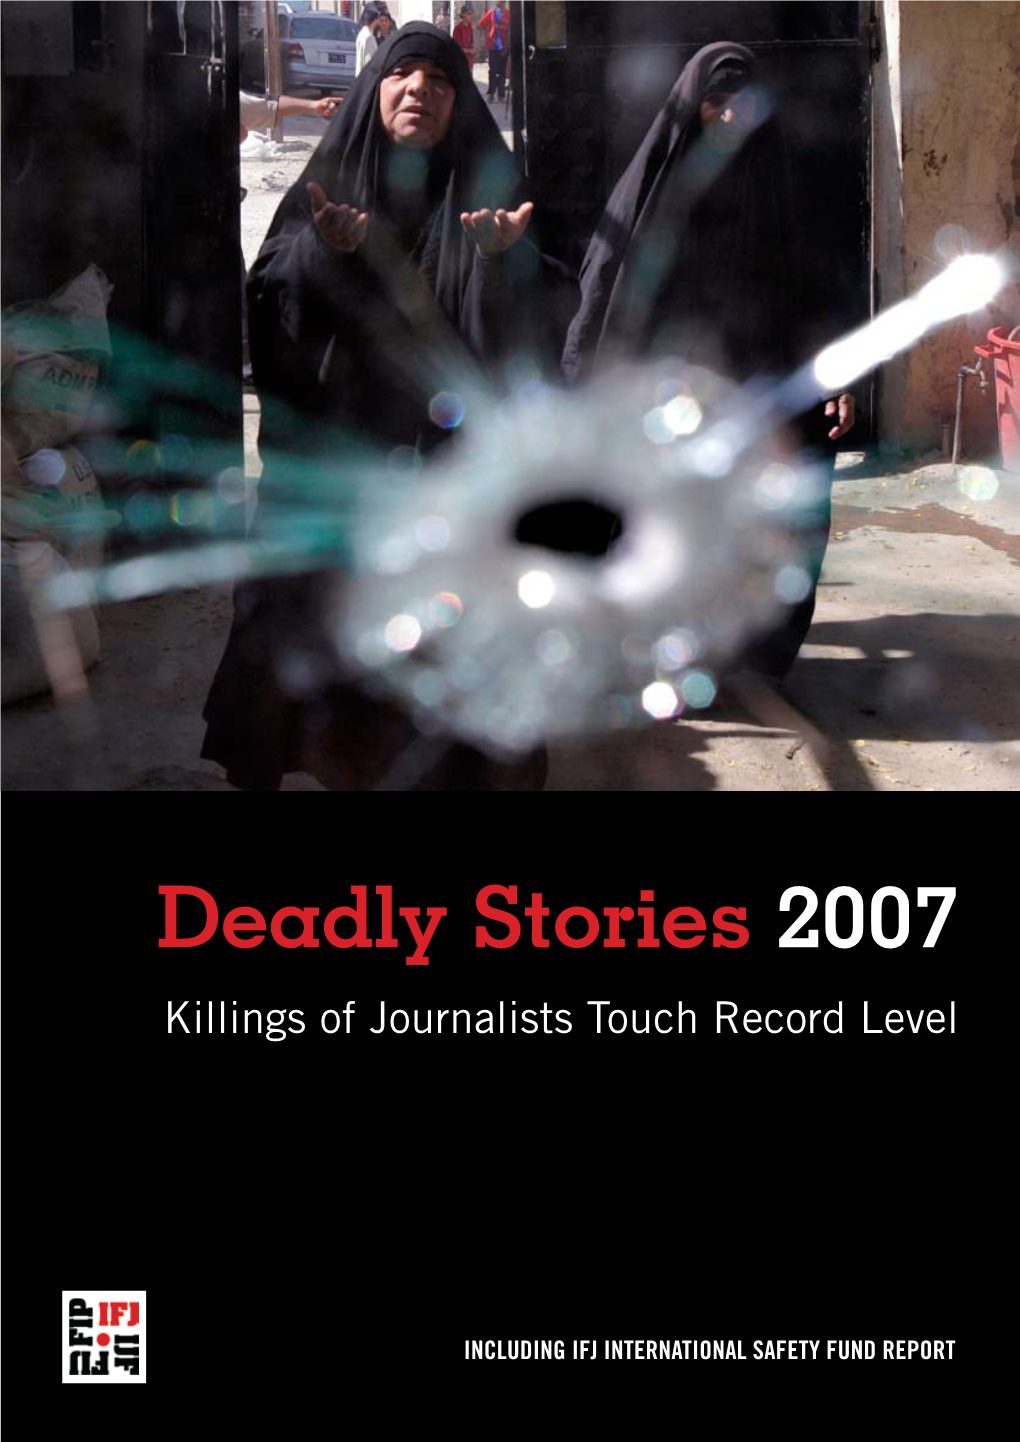 Deadly Stories 2007: Killings of Journalists Touch Record Level